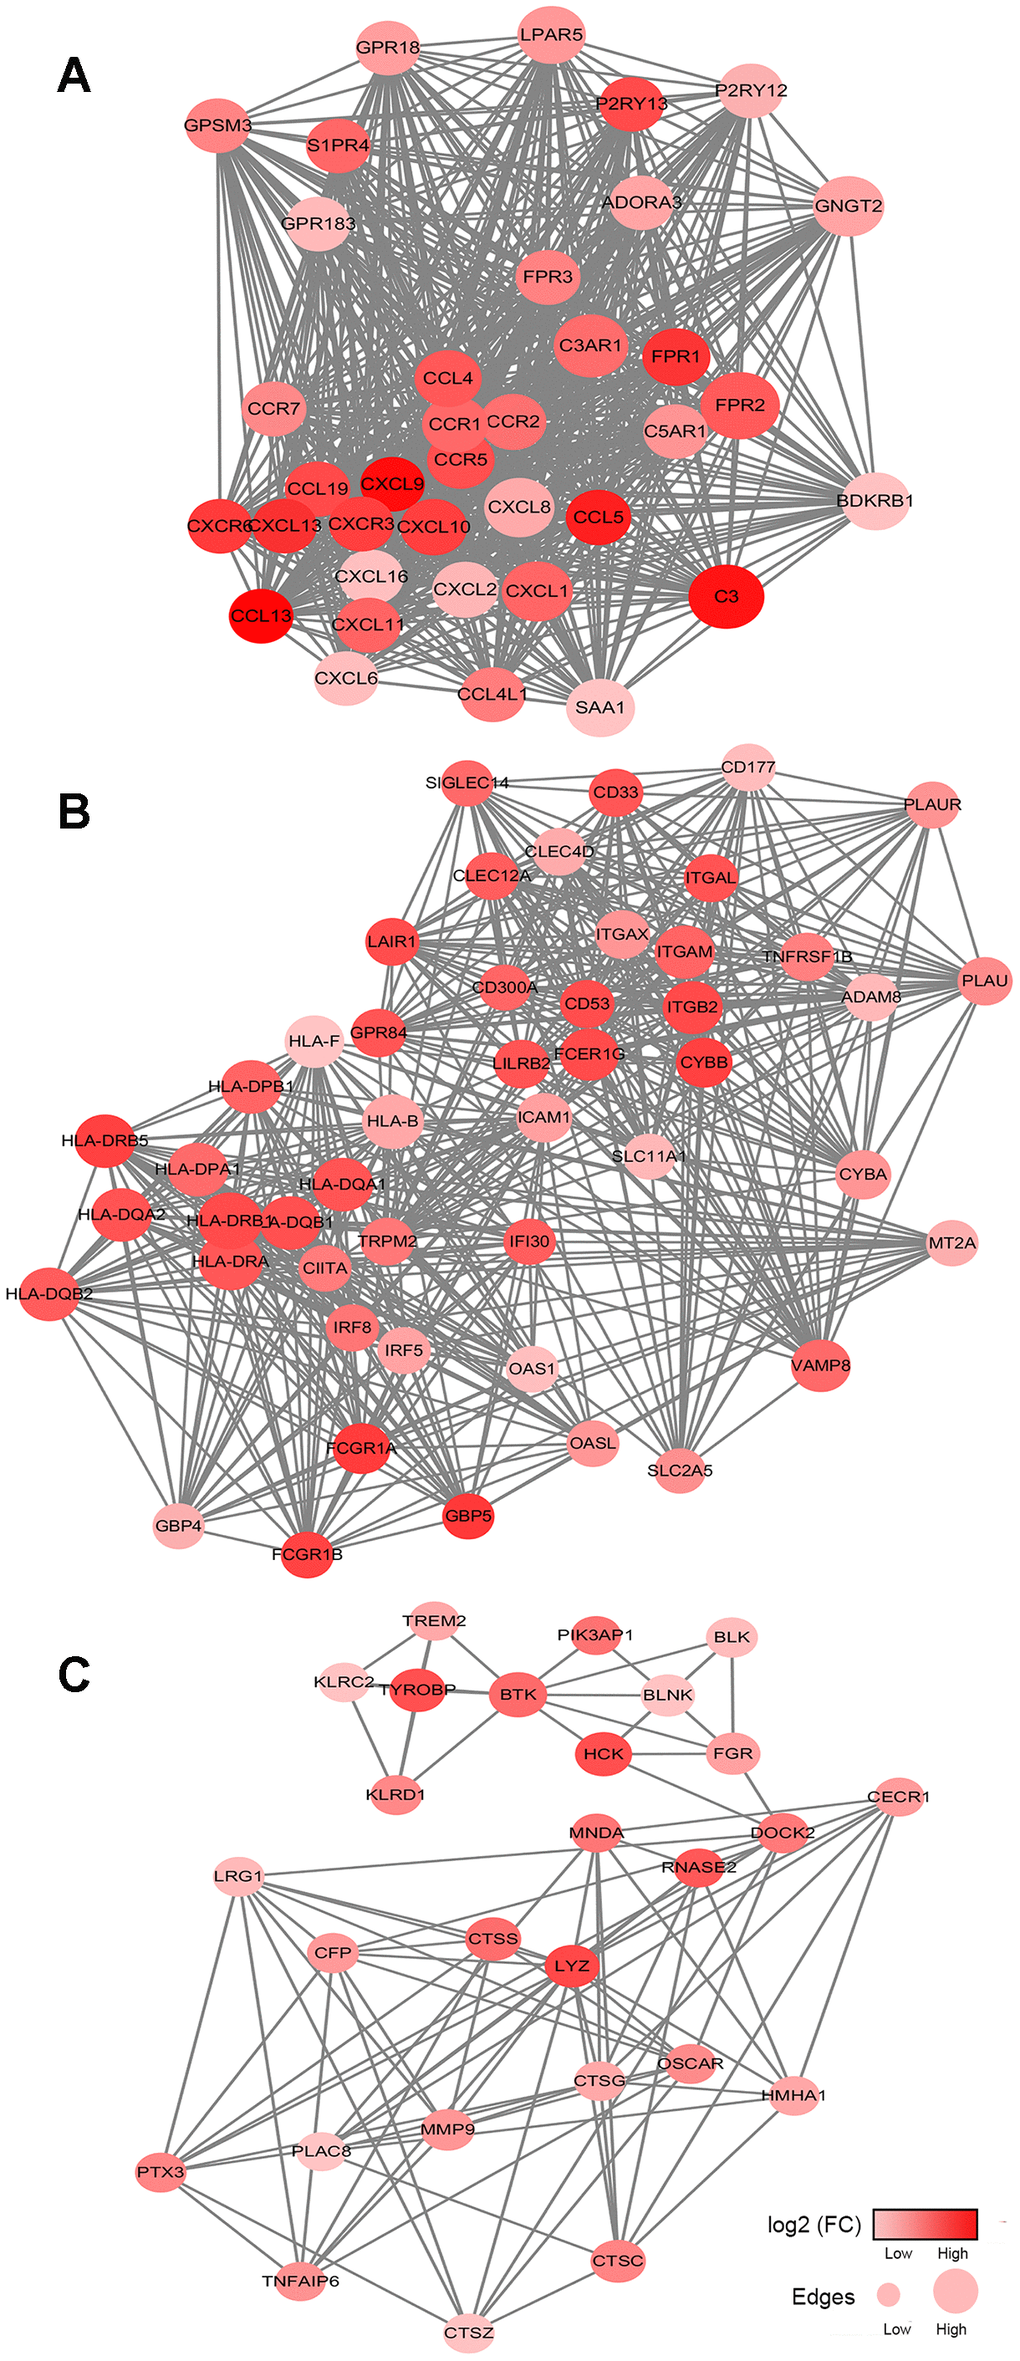 Network analysis results of the top 3 protein-protein interaction networks for DEGs significantly associated with overall survival. (A–C) The cell chemotaxis network, immune response network and leukocyte mediated immunity network. The gradient color scale indicates the log value of expression fold change (log2 (FC)), and node sizes reflect the number of interactions identified for each protein. FC: fold change.